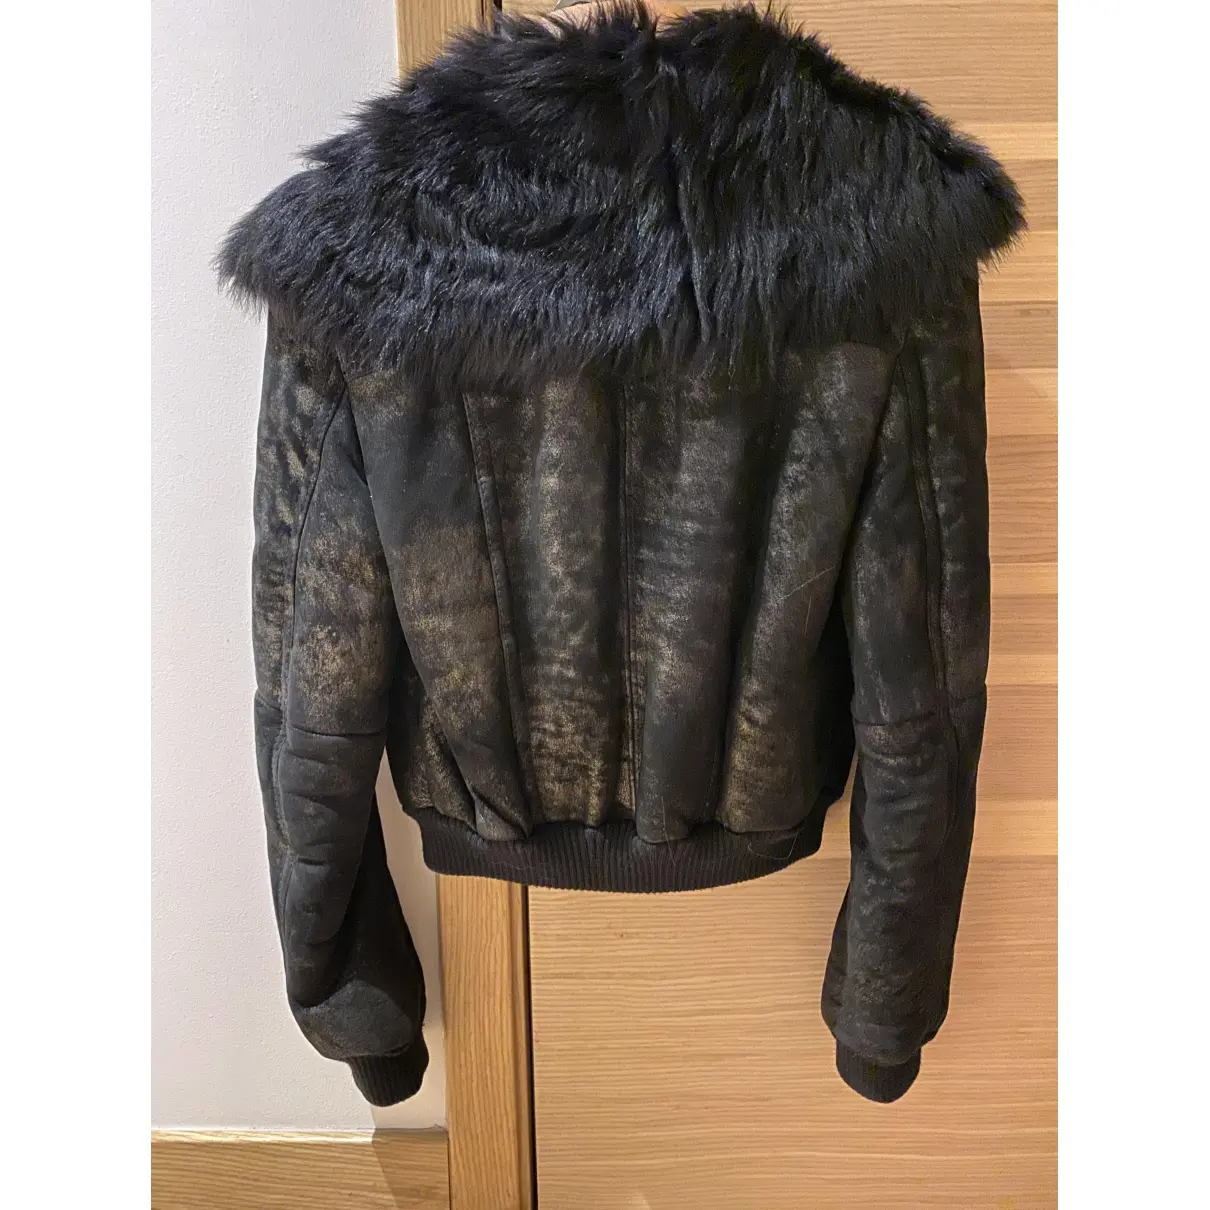 Galliano Leather jacket for sale - Vintage